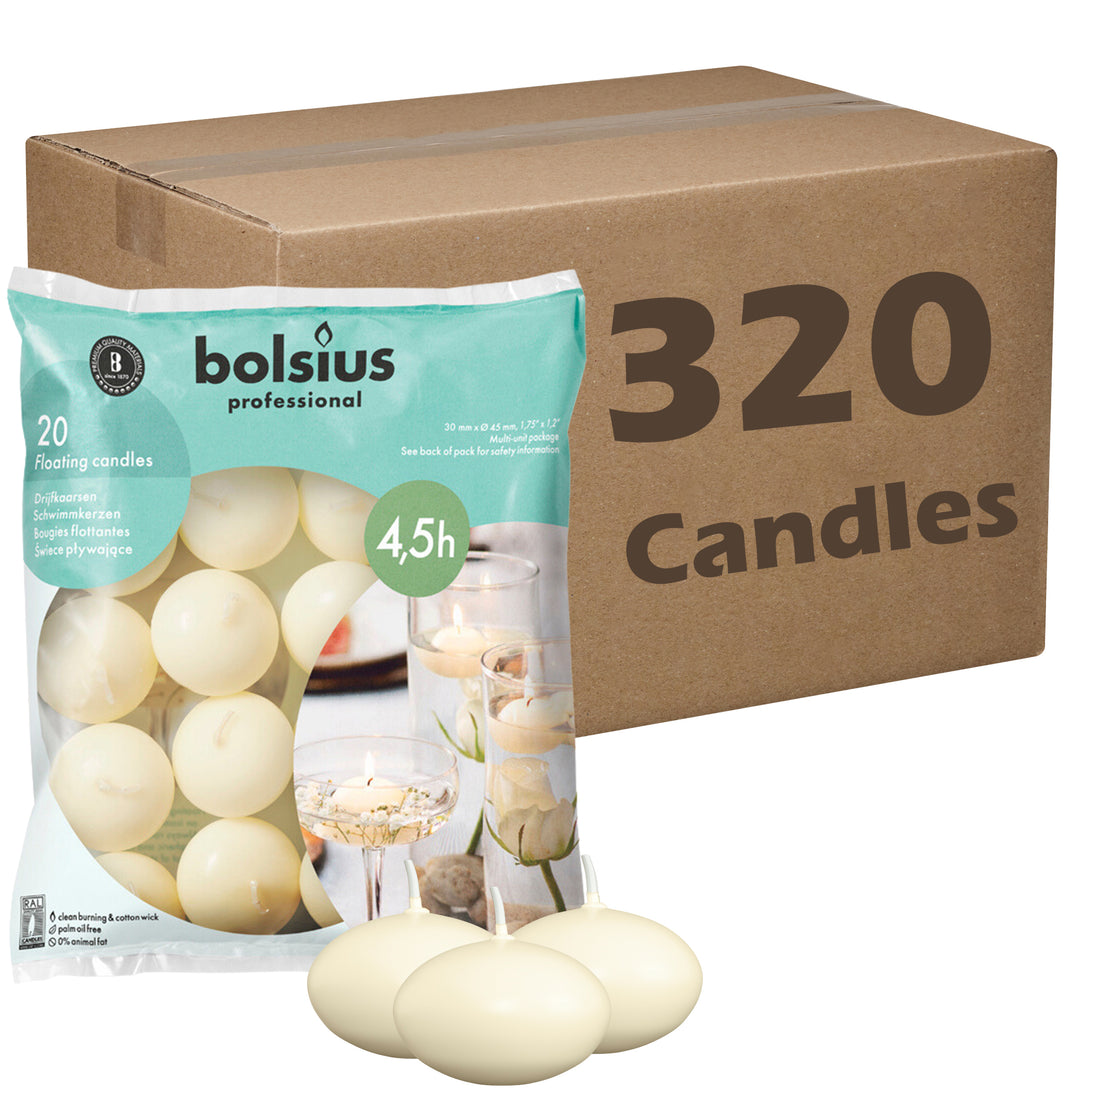 Copy of 1.75" X 1" Classic Bulk Floating Candles - 320 Pack